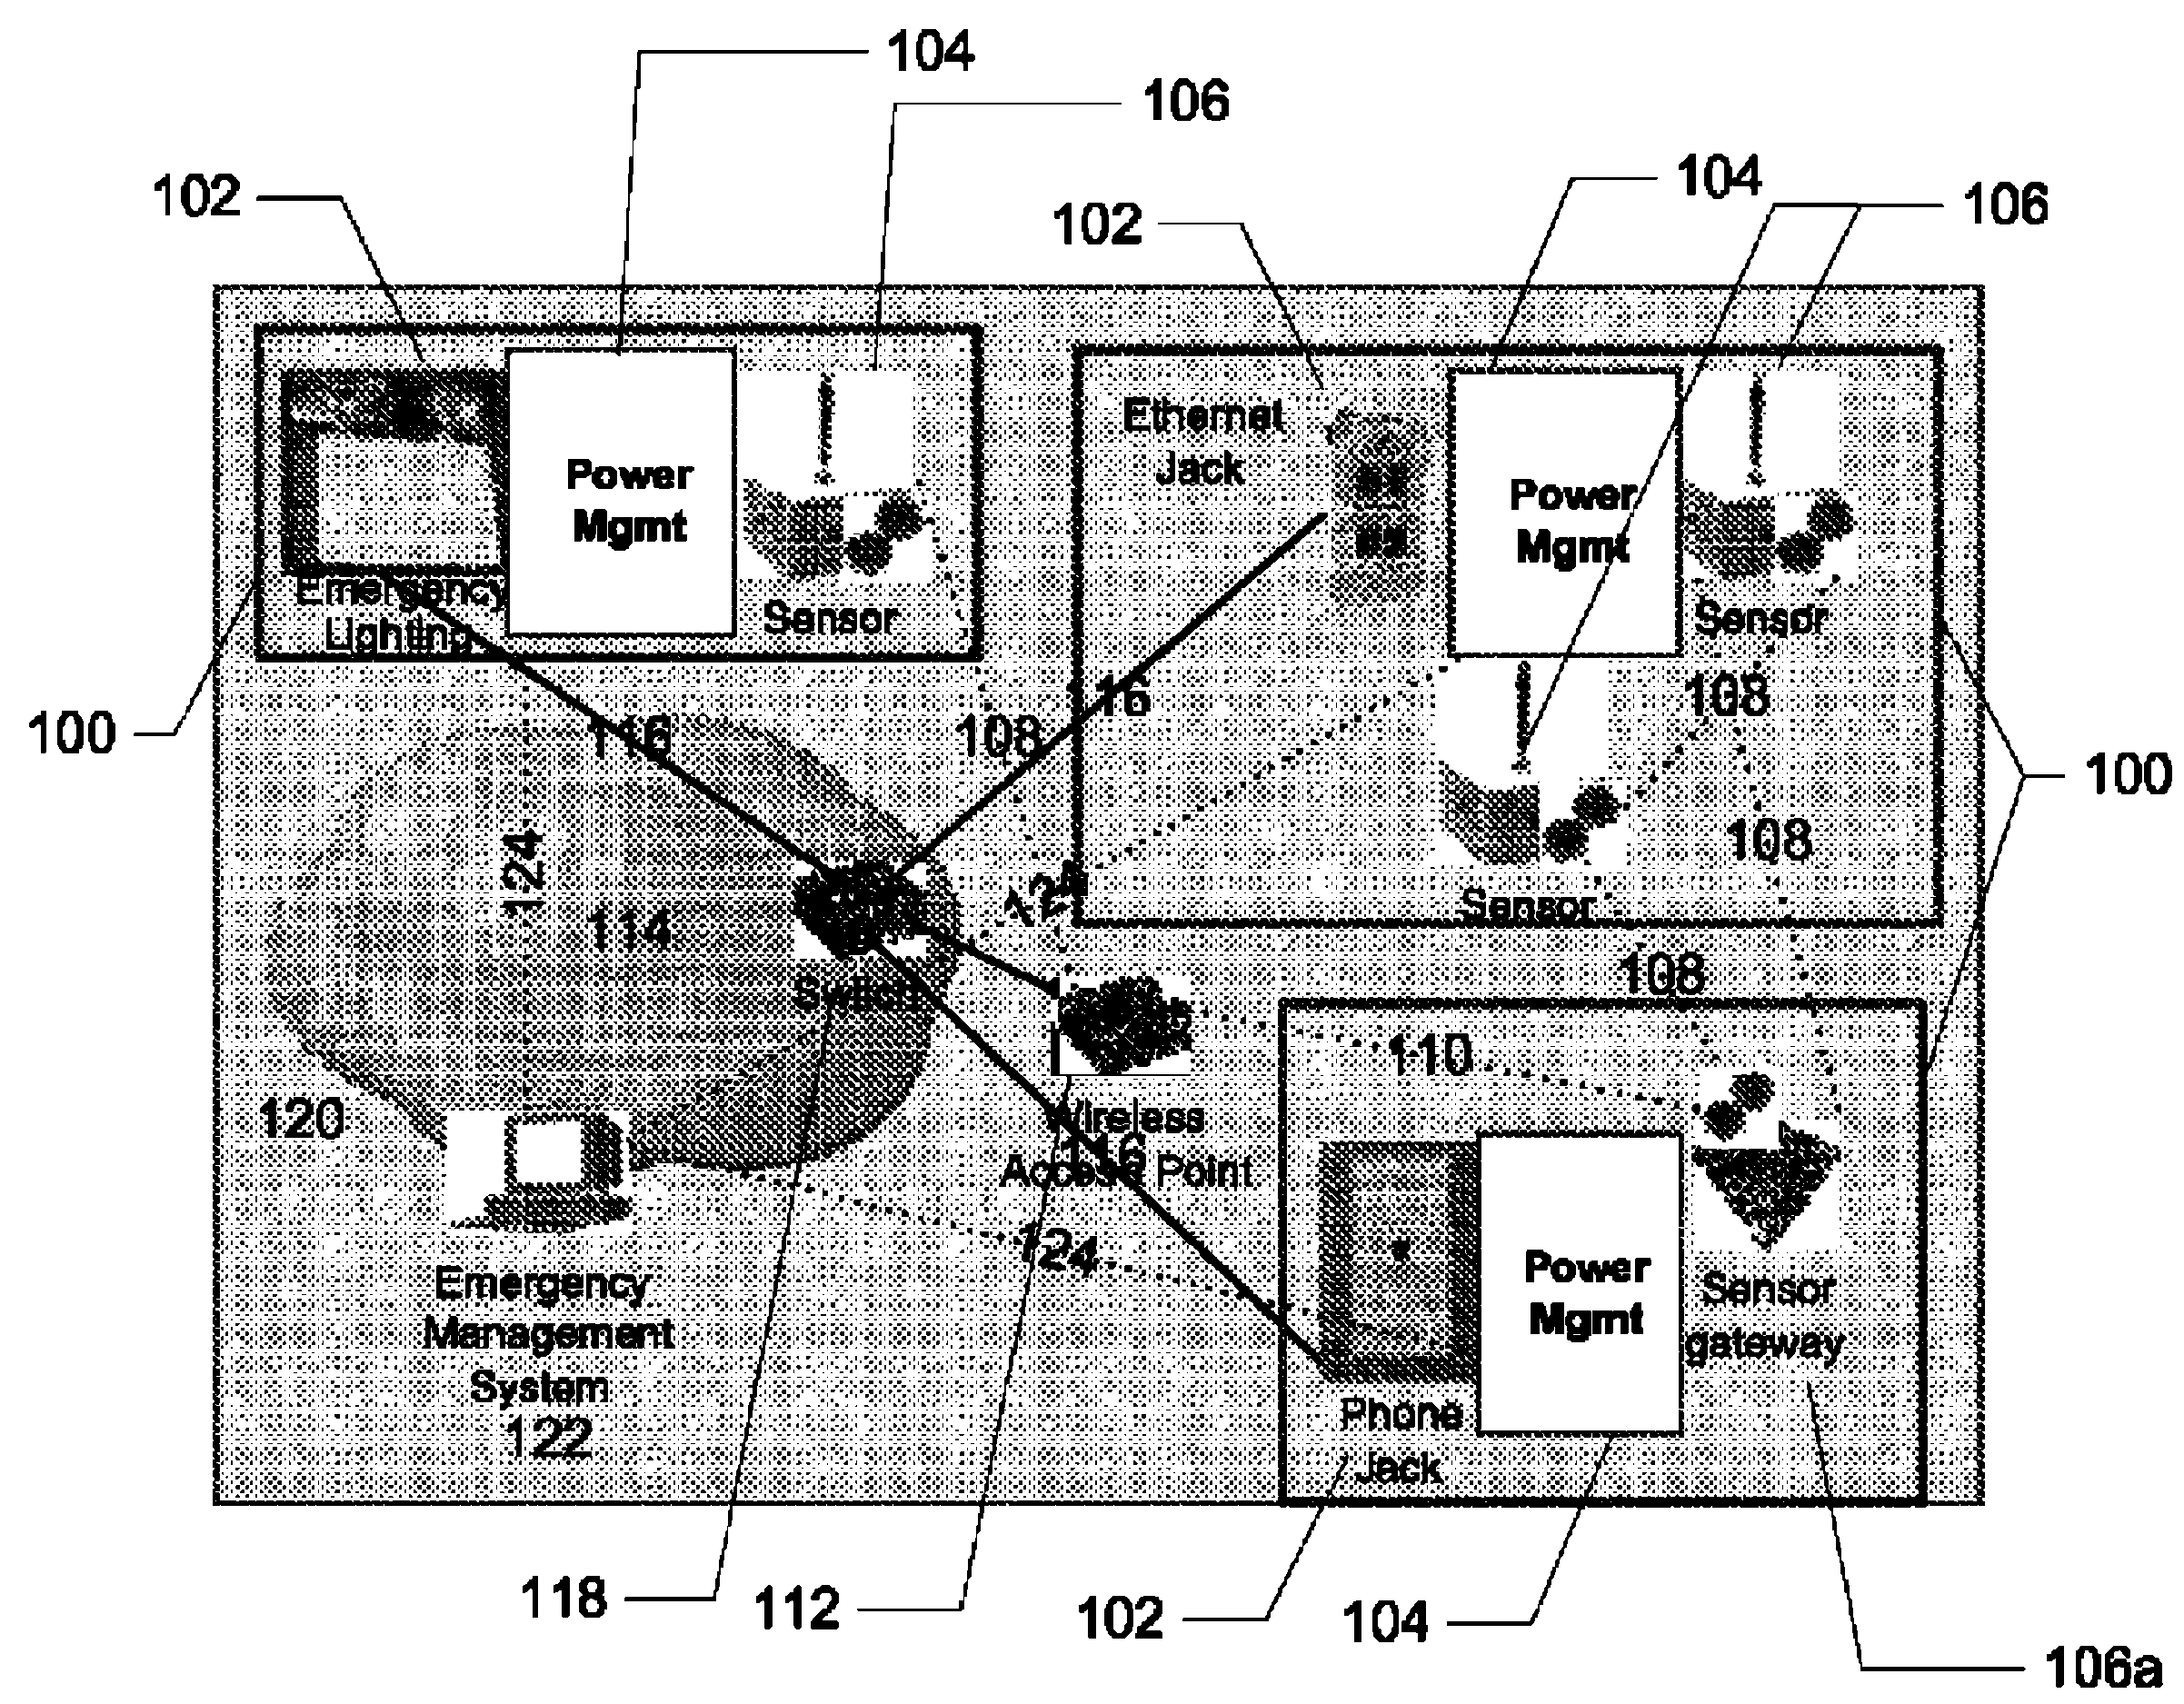 System and method for providing power management in a sensor network